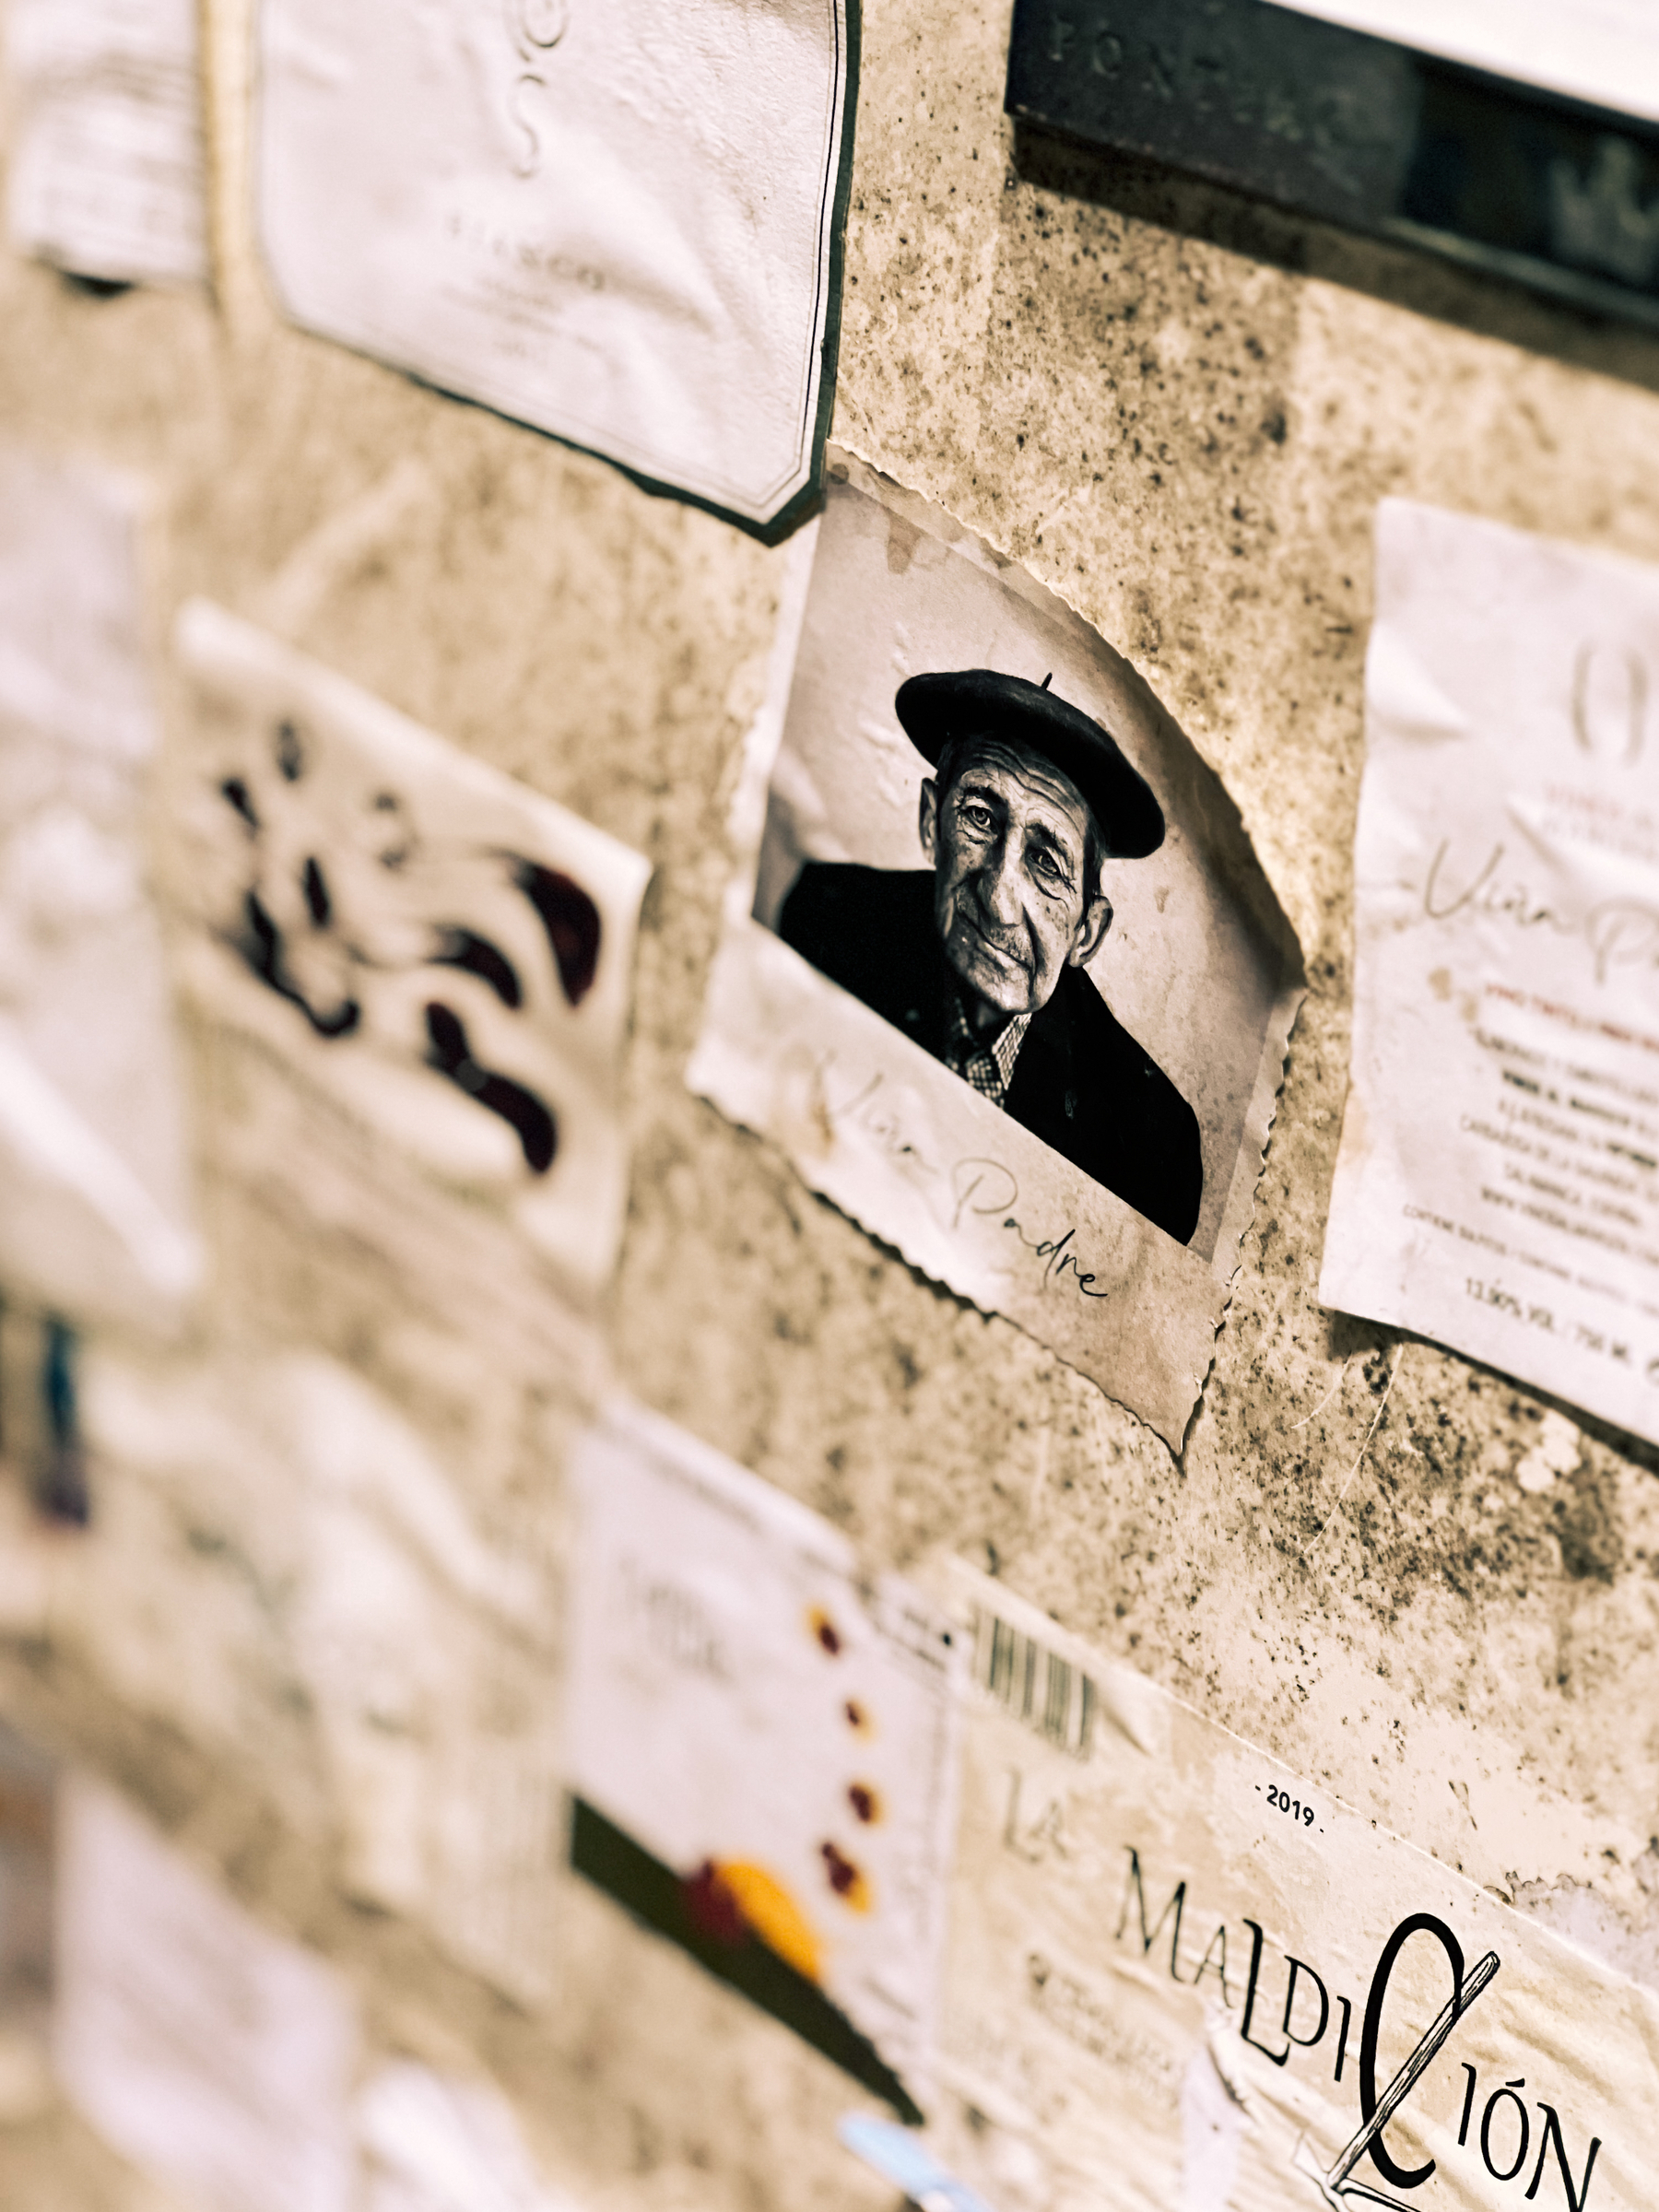 A tilted and close-up view of a wall covered with various notes and cards, with a photo of an elderly man wearing a beret centered in the image, surrounded by other papers.